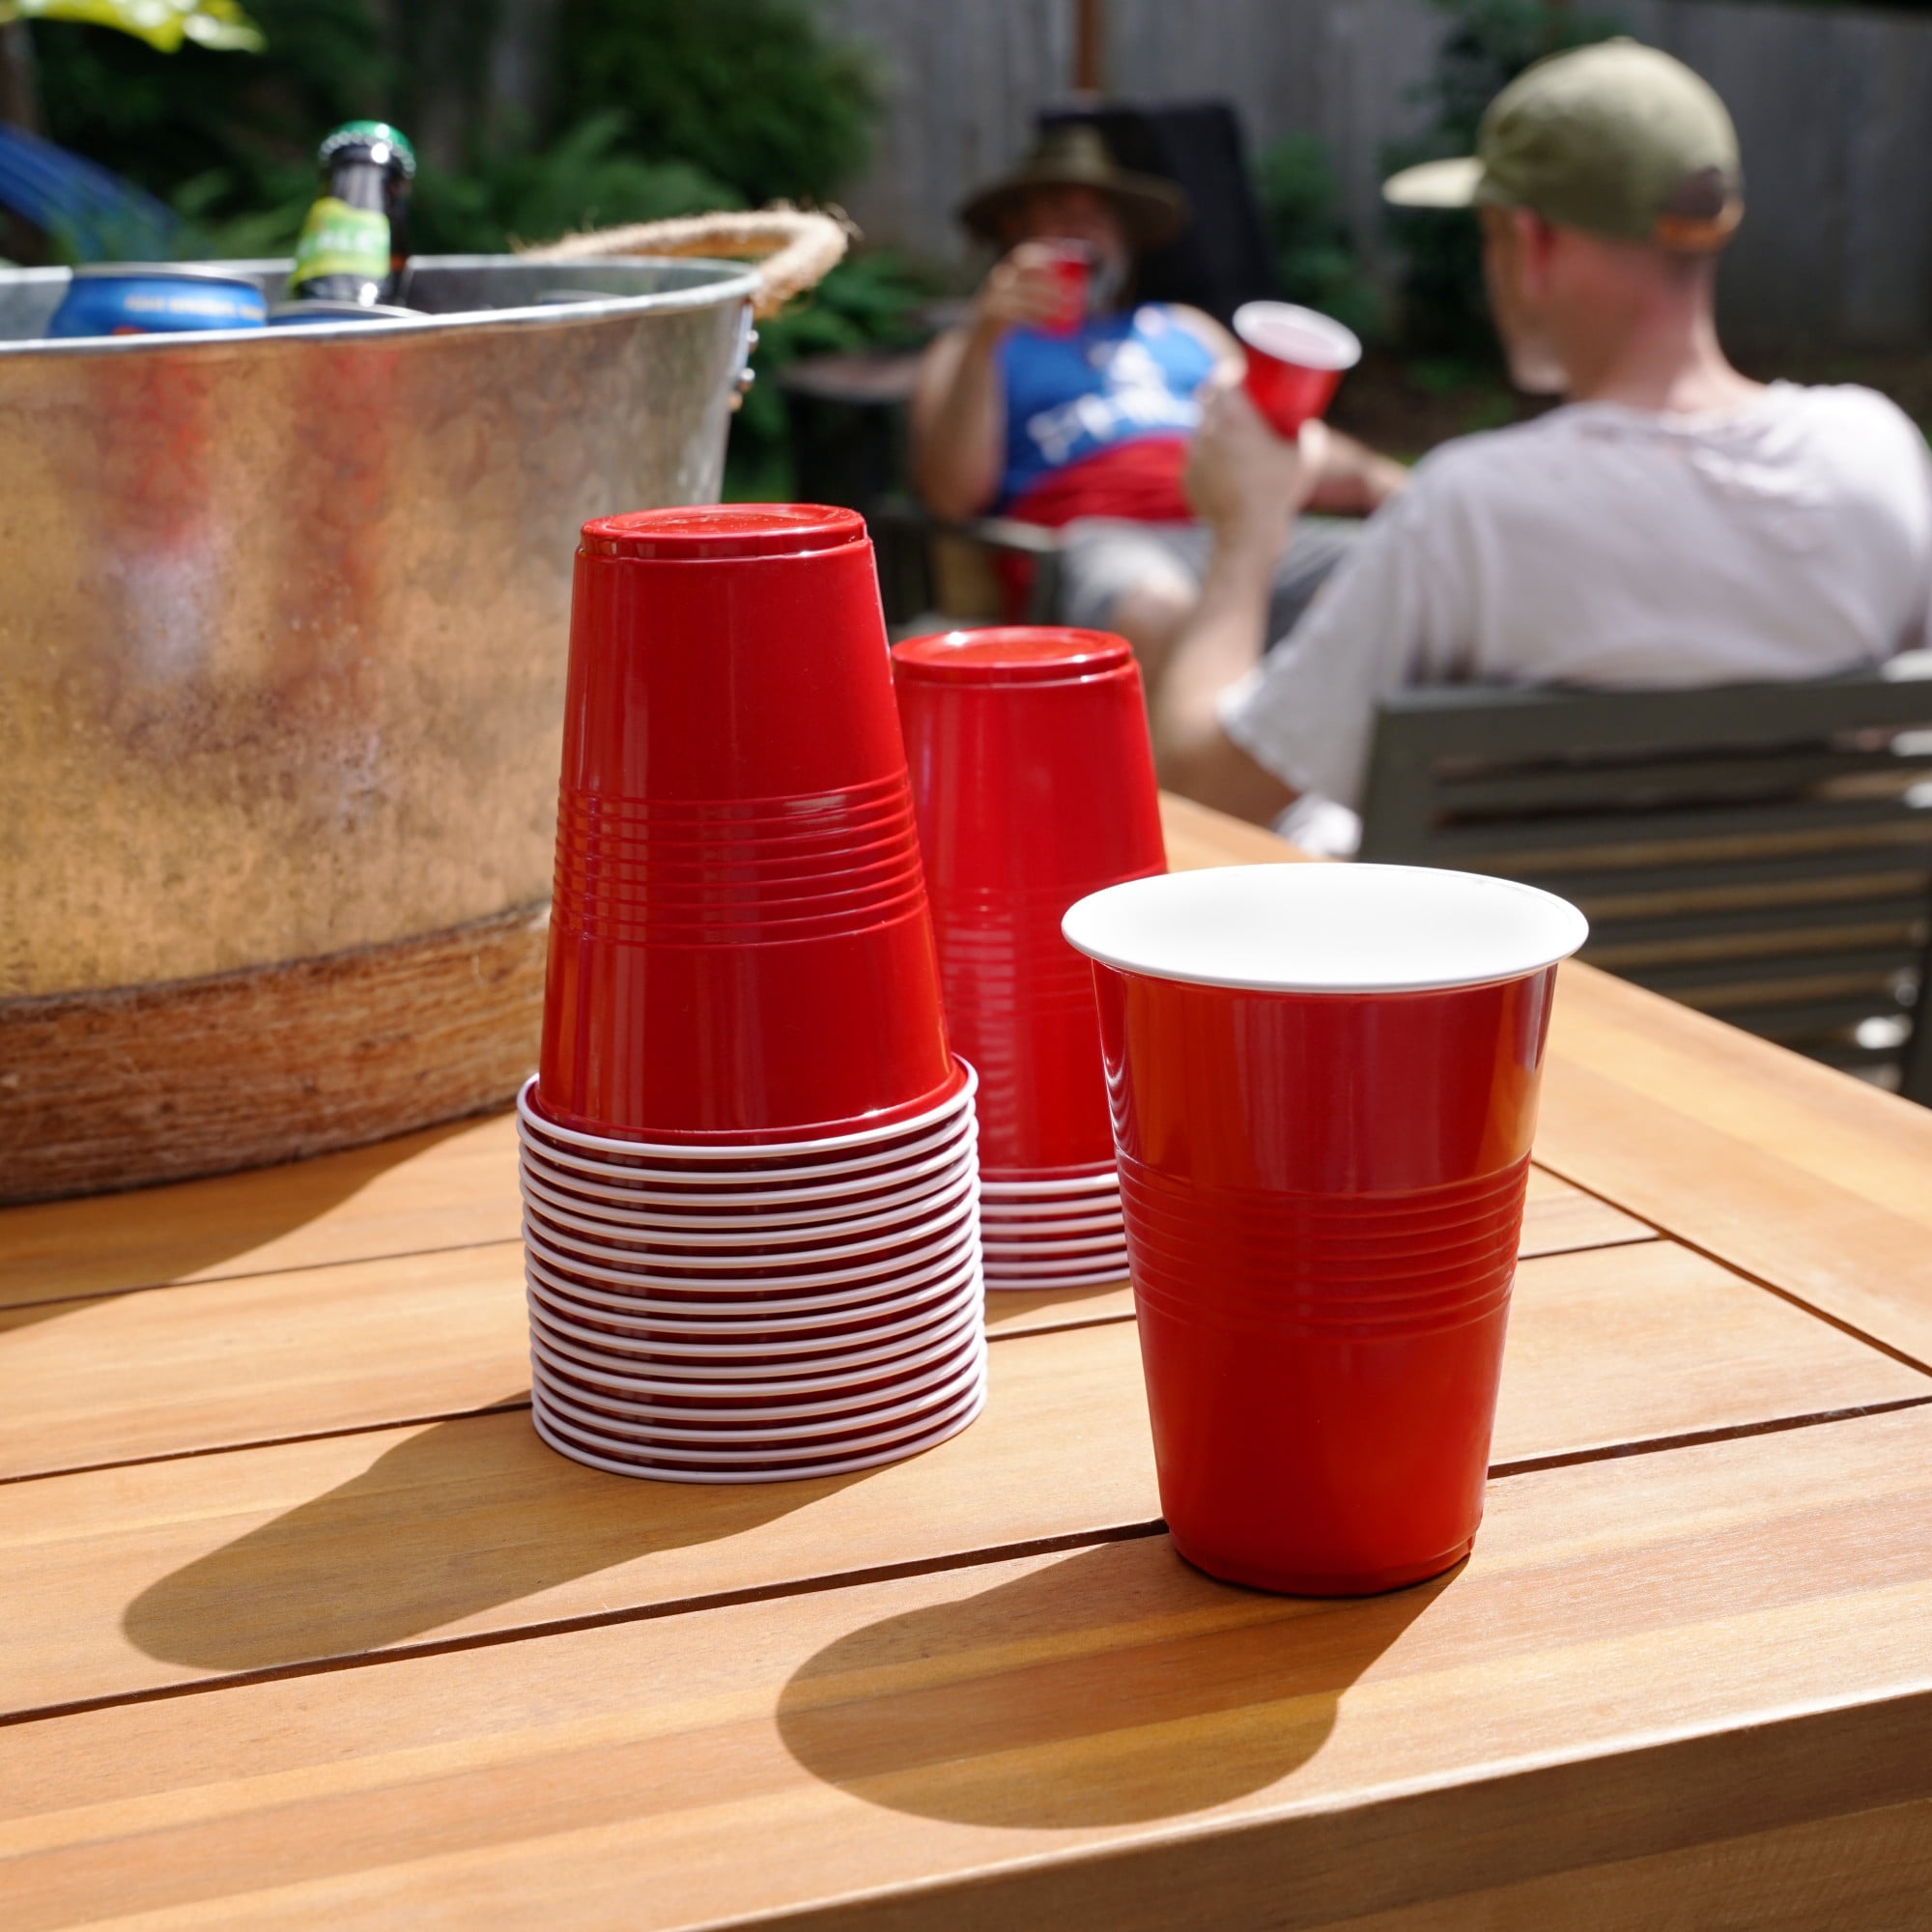 Red Disposable Plastic Cups [16 oz - 100 Pack] Fun & Durable Party Cups for  Drinking & Playing - Bul…See more Red Disposable Plastic Cups [16 oz - 100